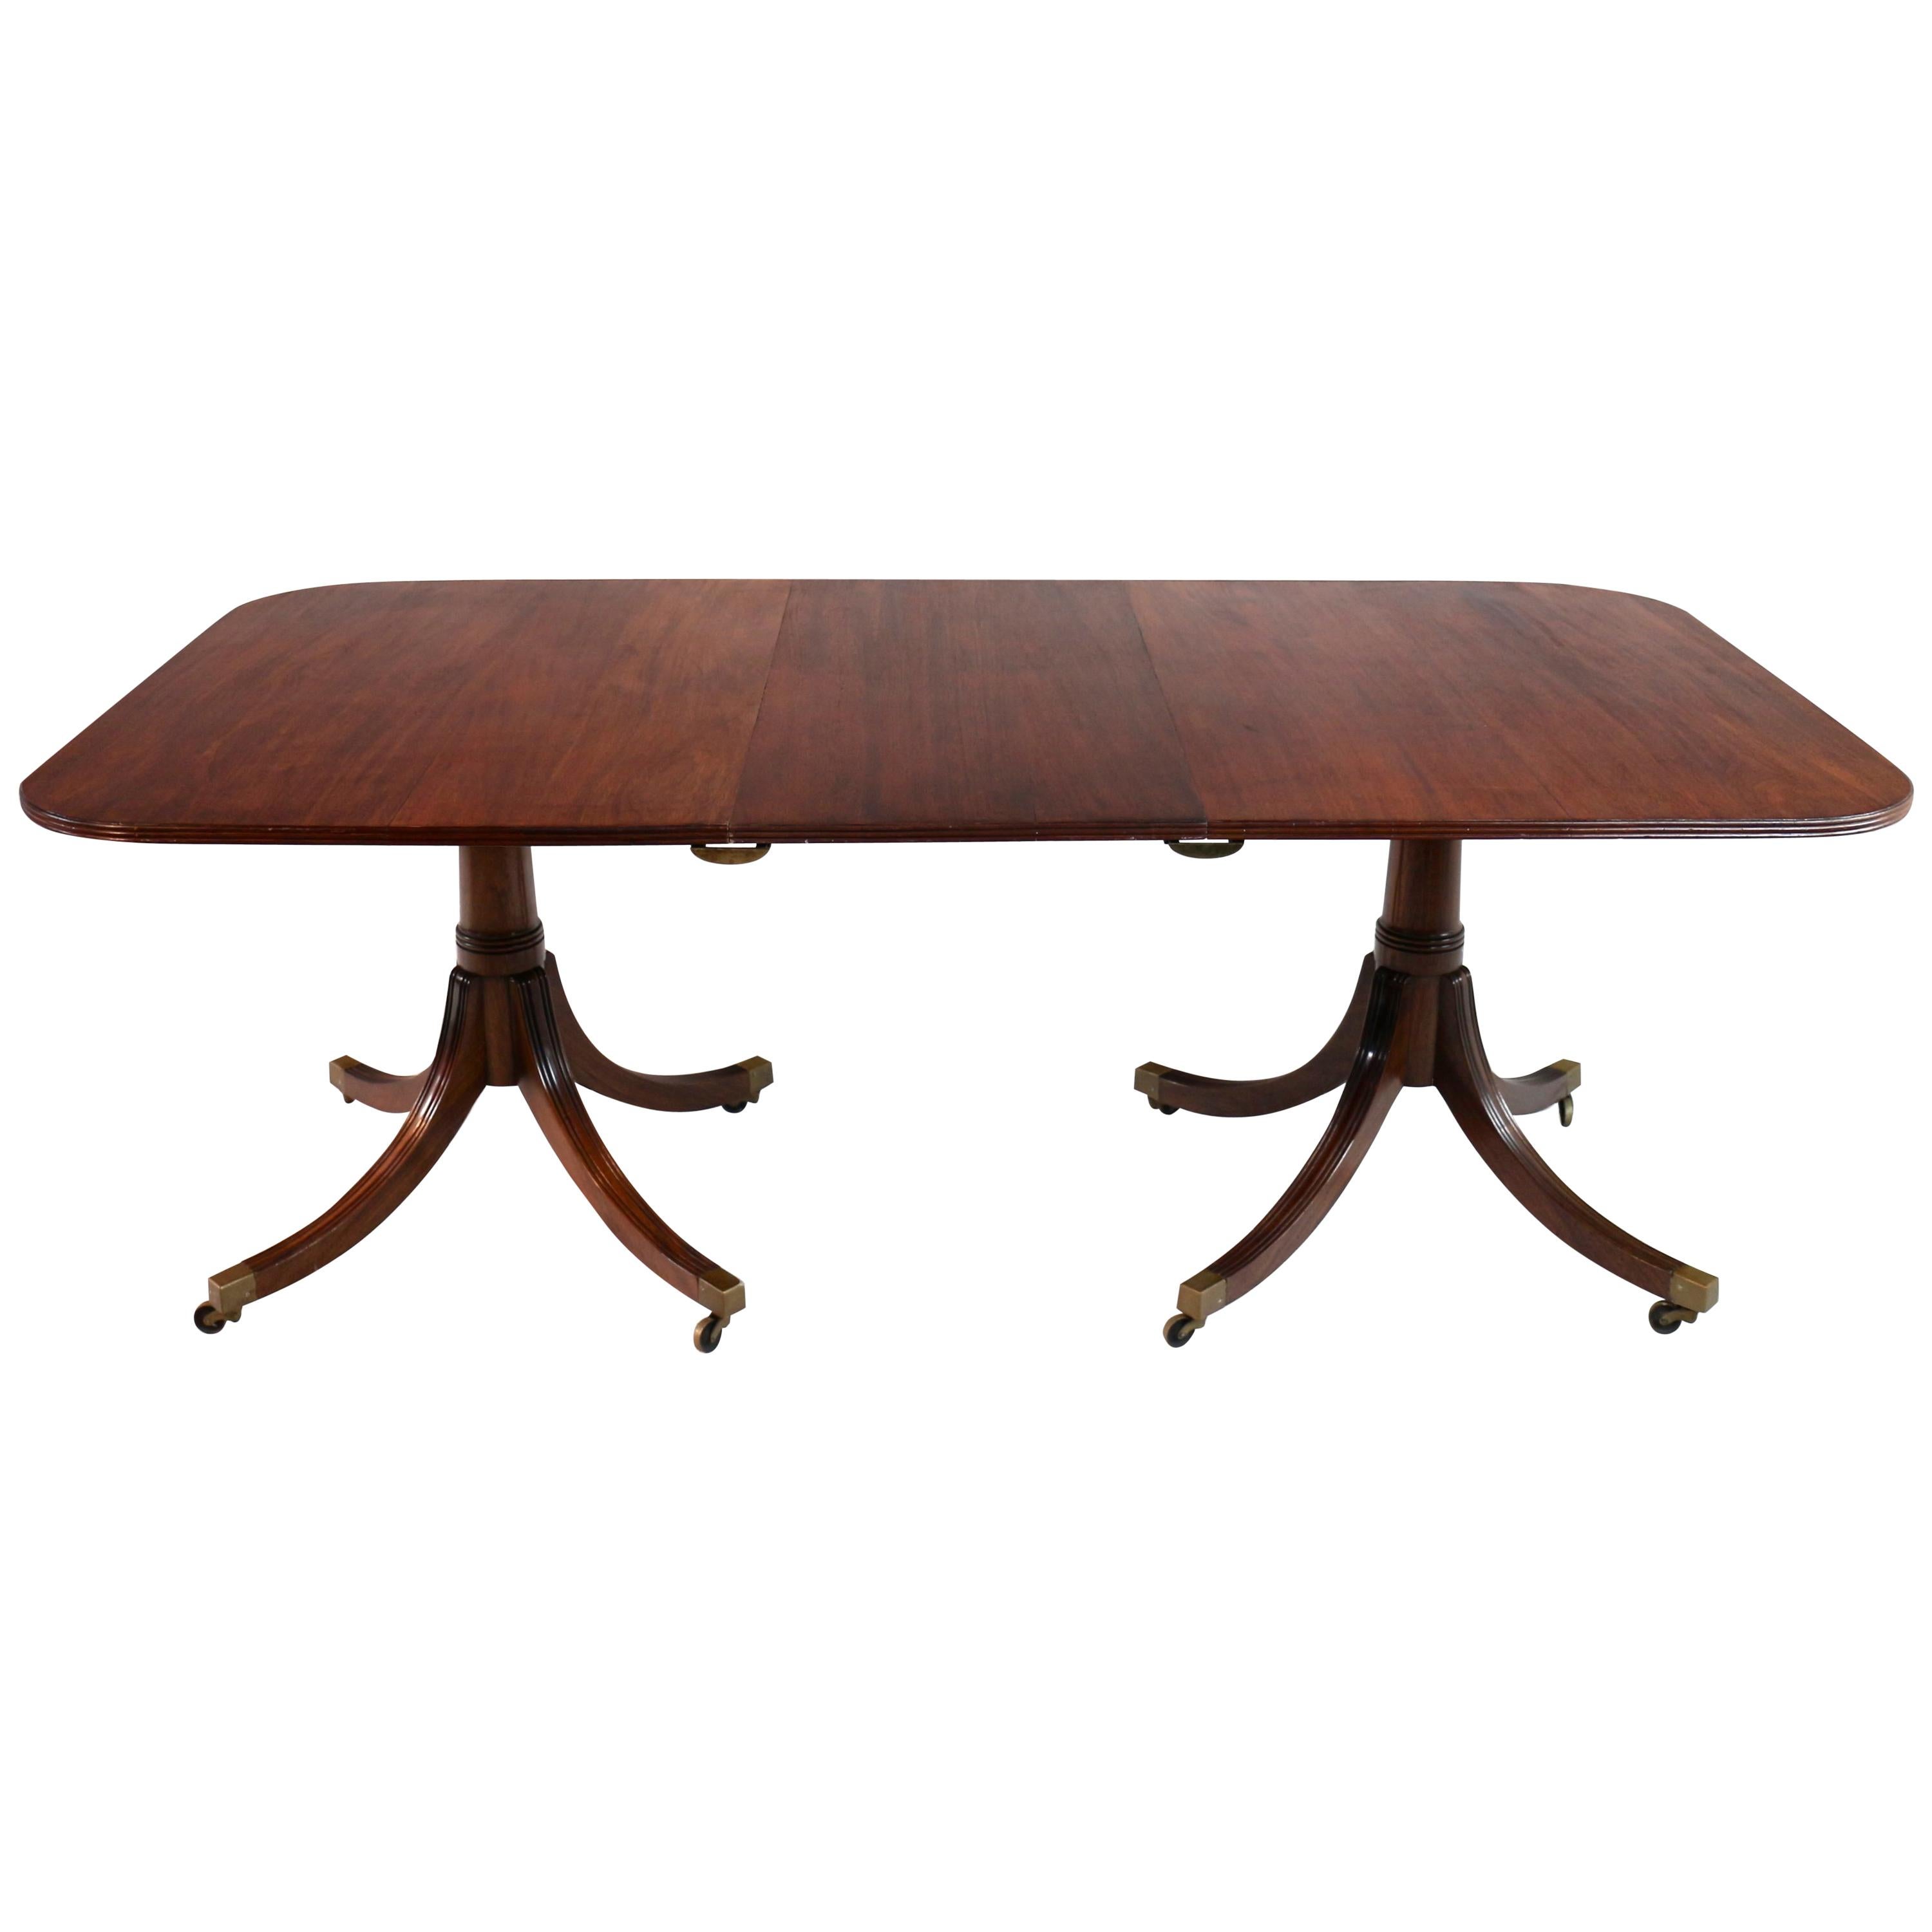 Regency Style Solid Mahogany Twin Pillar Dining Table/Pair Side Tables, Seats 8